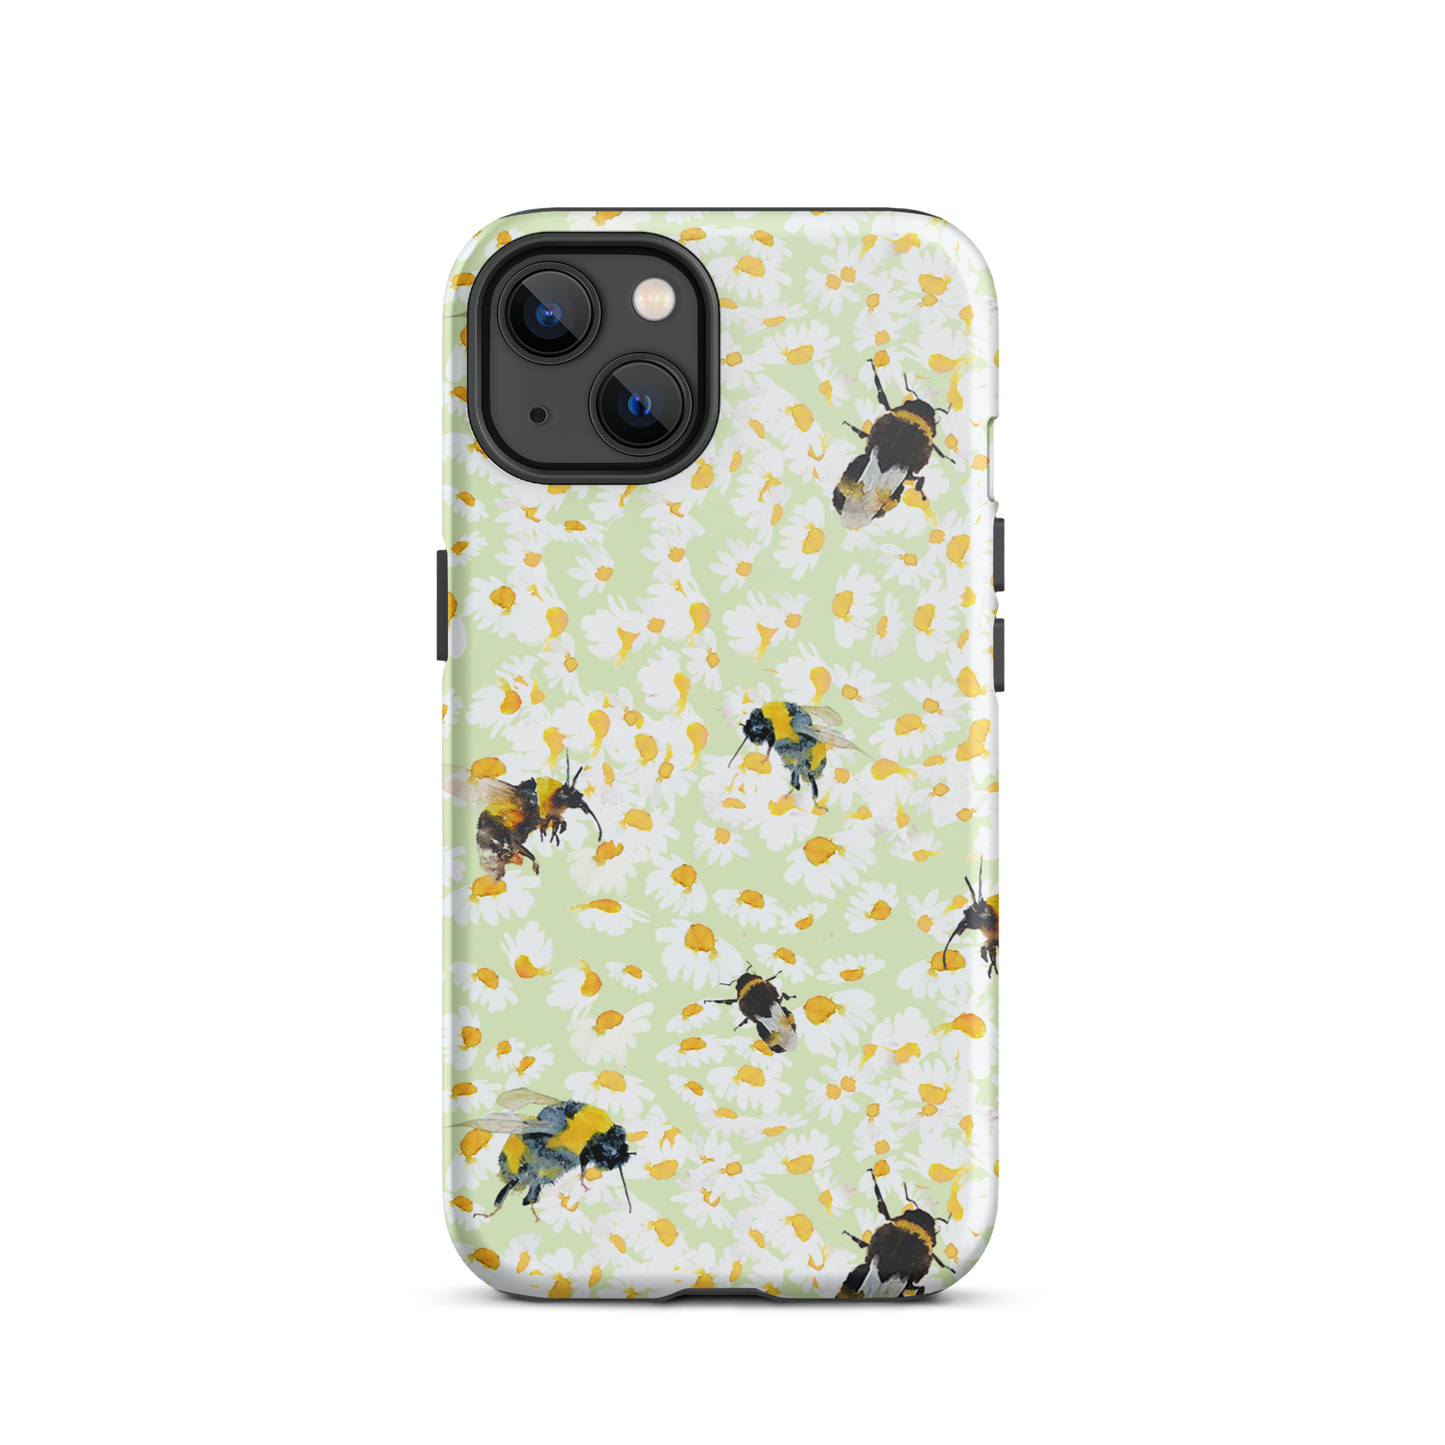 Fresh Bee and Daisies Mobile Phone by Artist Annie Grant